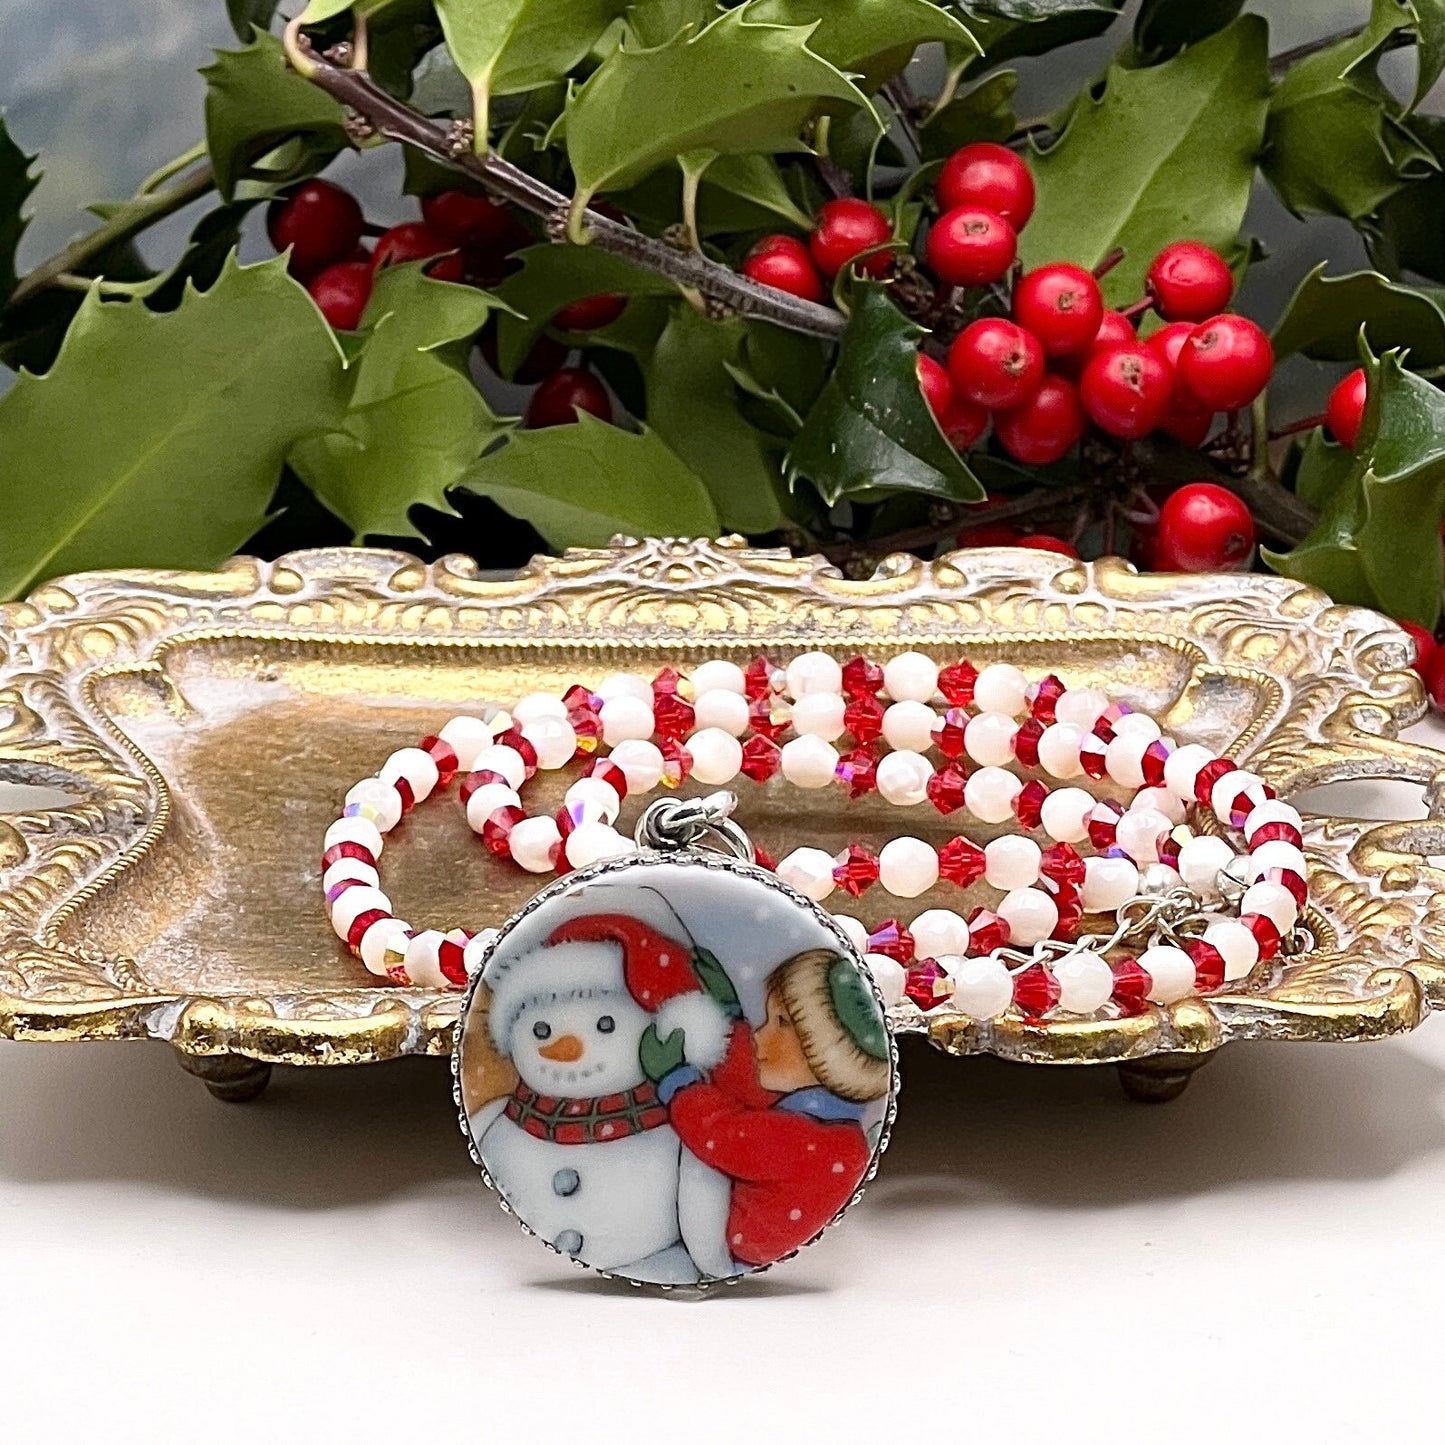 Making a Snowman, Broken China Jewelry, Pearl Beaded Necklace, Unique Christmas Jewelry Gifts for Women